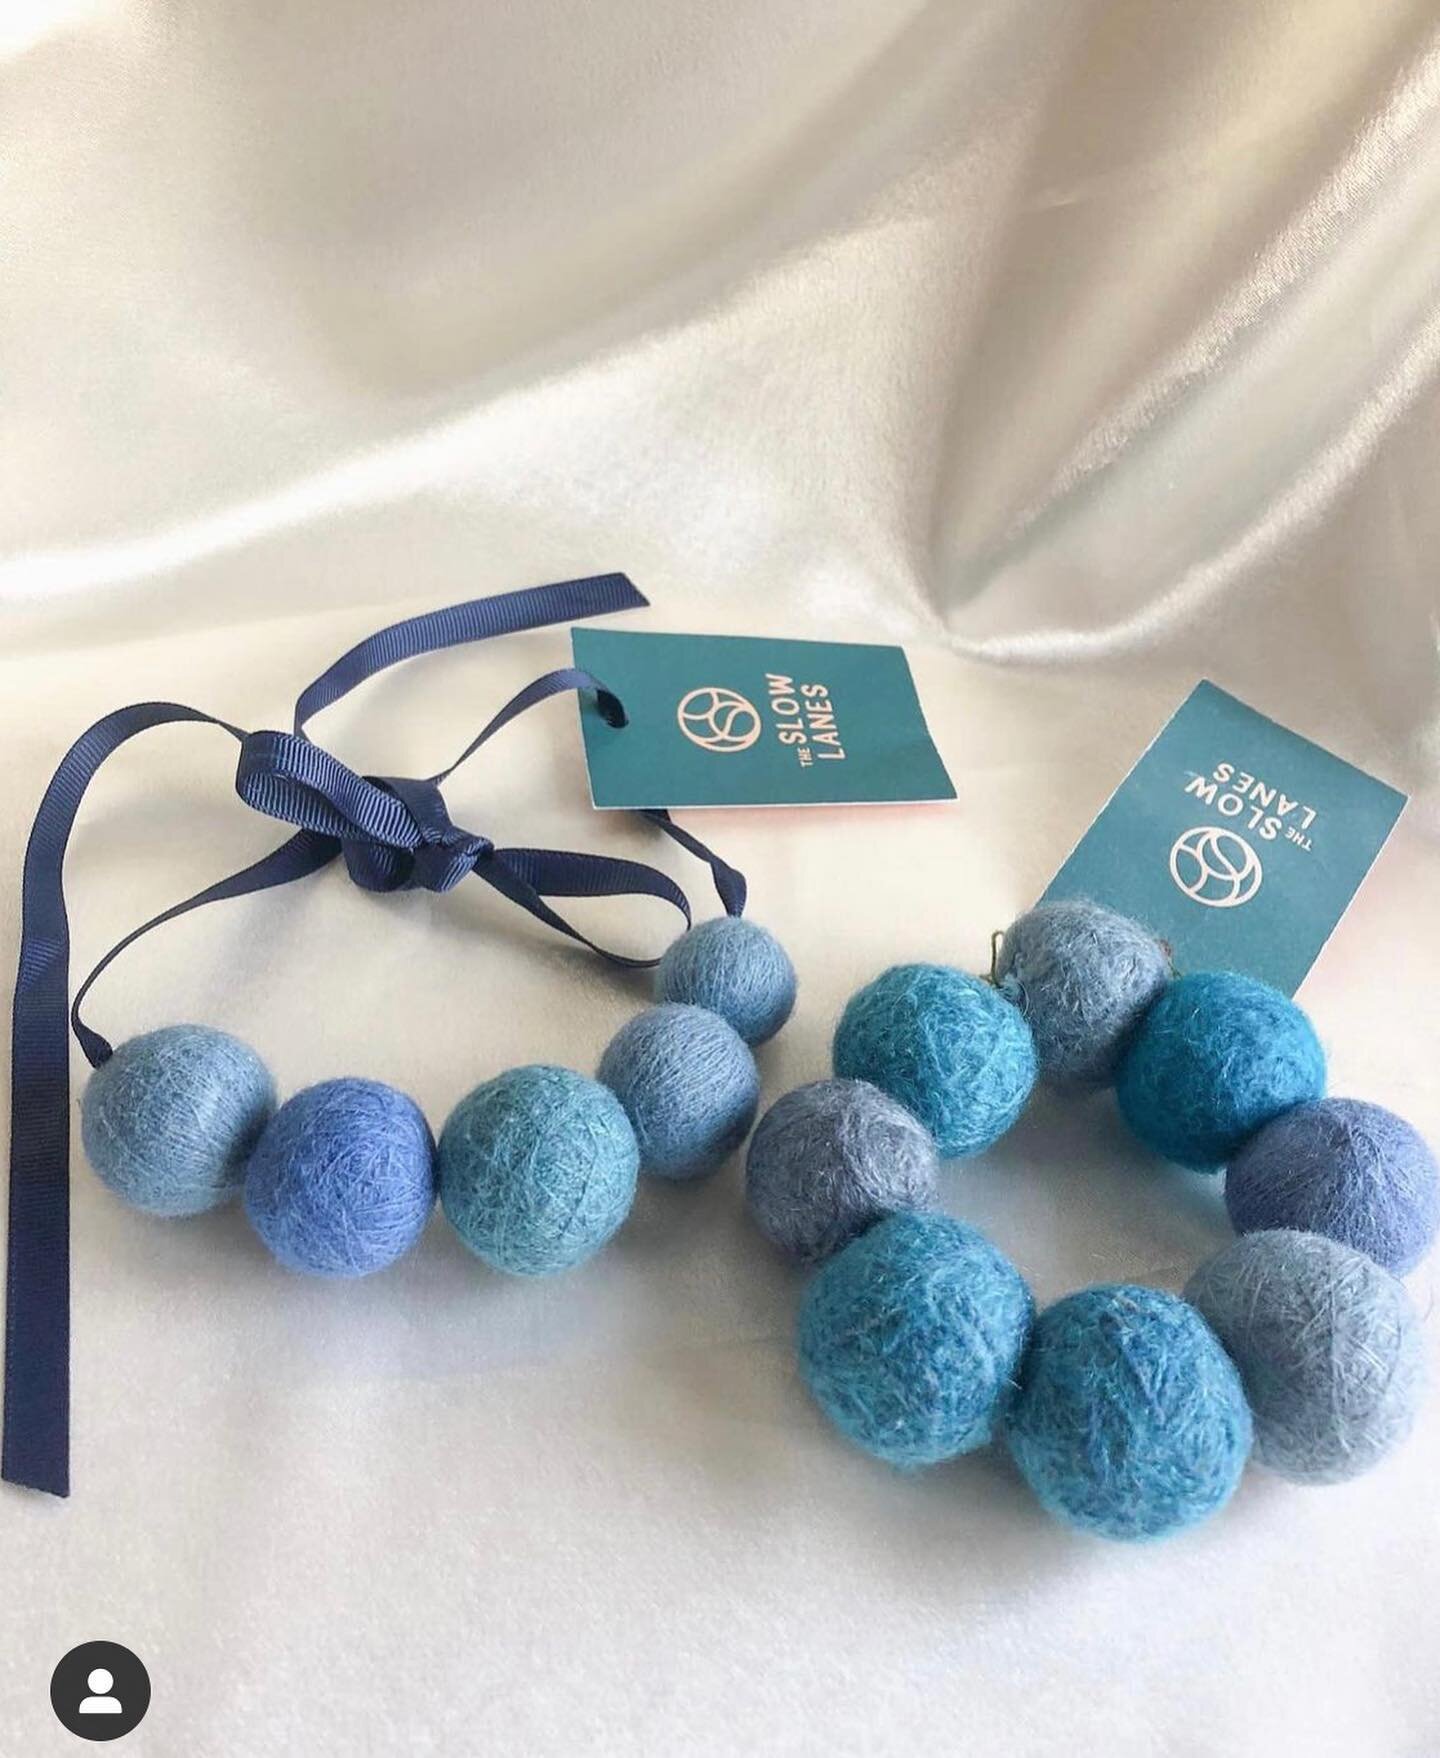 🌸❤️WIN ALL THESE SMALL BUSINESS GOODIES INCLUDING THIS BLUE SET OF RECYCLED WOOL JEWELLERY ❤️🌸

HEAD OVER TO CELEBRATE AND ENTER AT @sew_last_summer !

***🧡LATE B-DAY CELEBRATION🧡

This is a few weeks late BUT to celebrate our first business birt